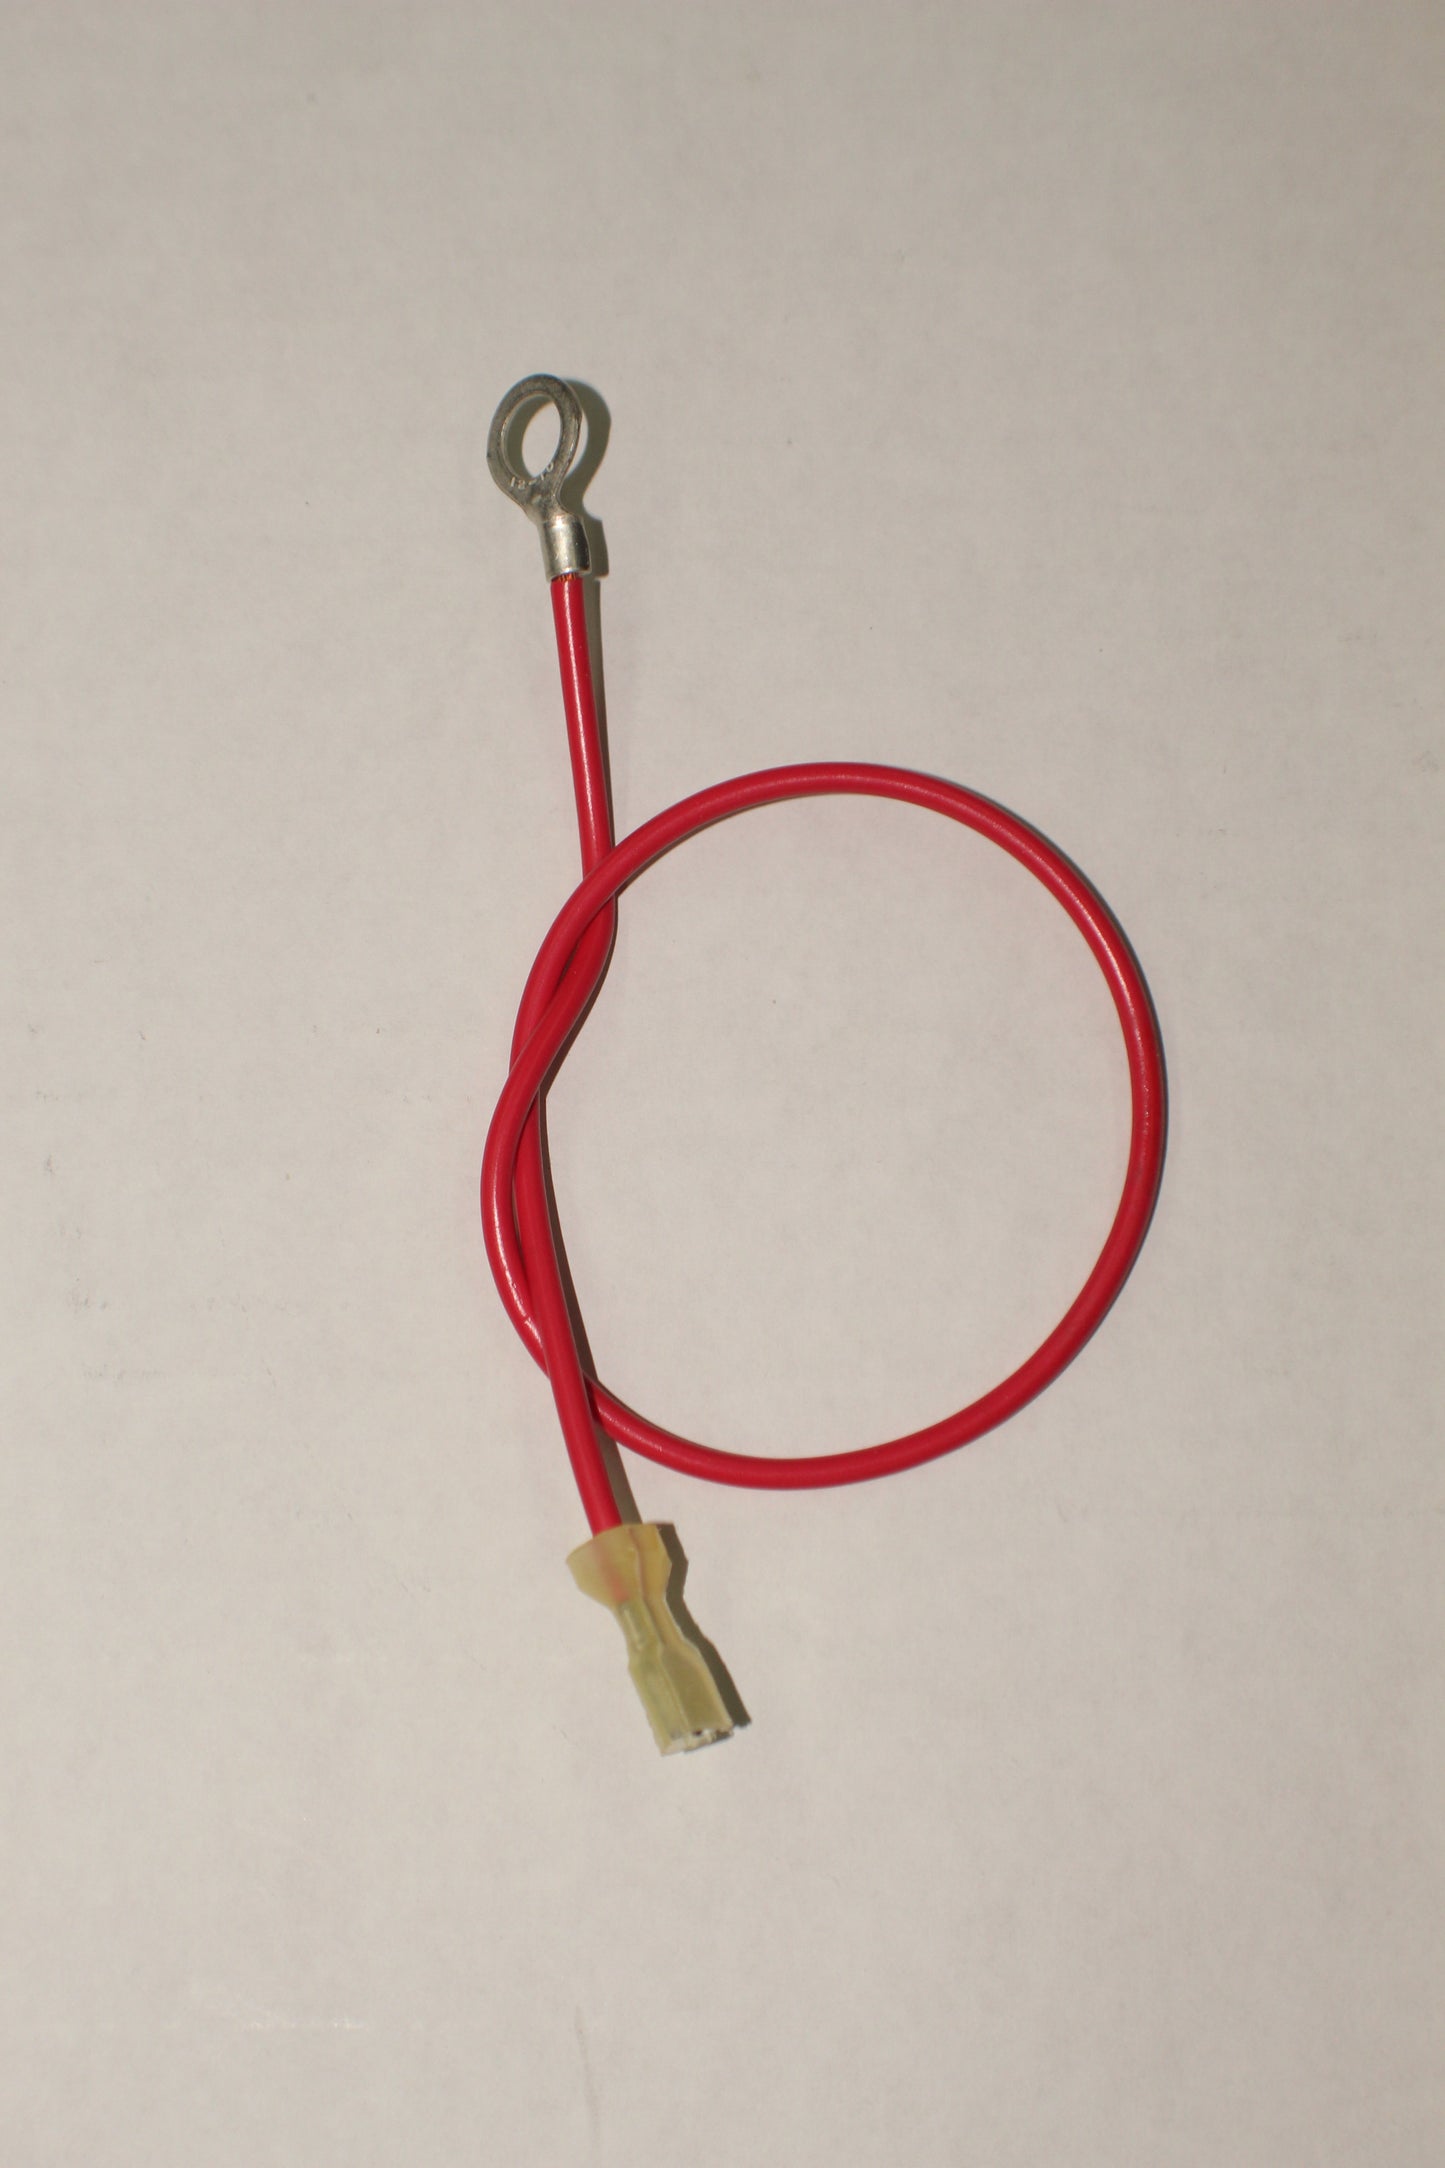 802005 JUMPER WIRES RED